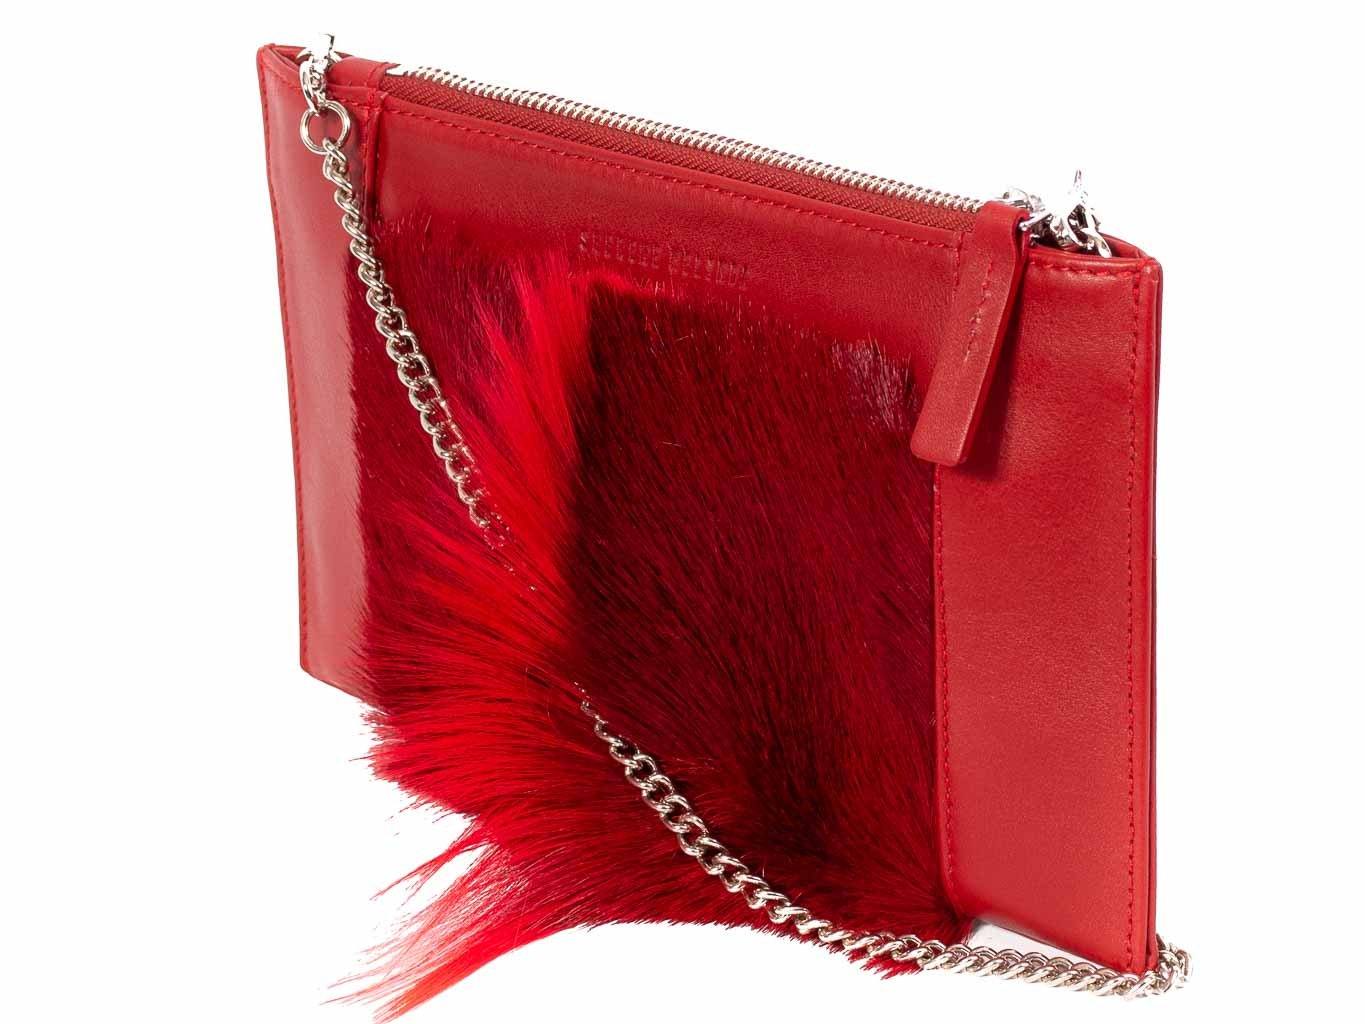 Clutch Springbok Handbag in Crimson Red with a fan feature by Sherene Melinda side angle strap